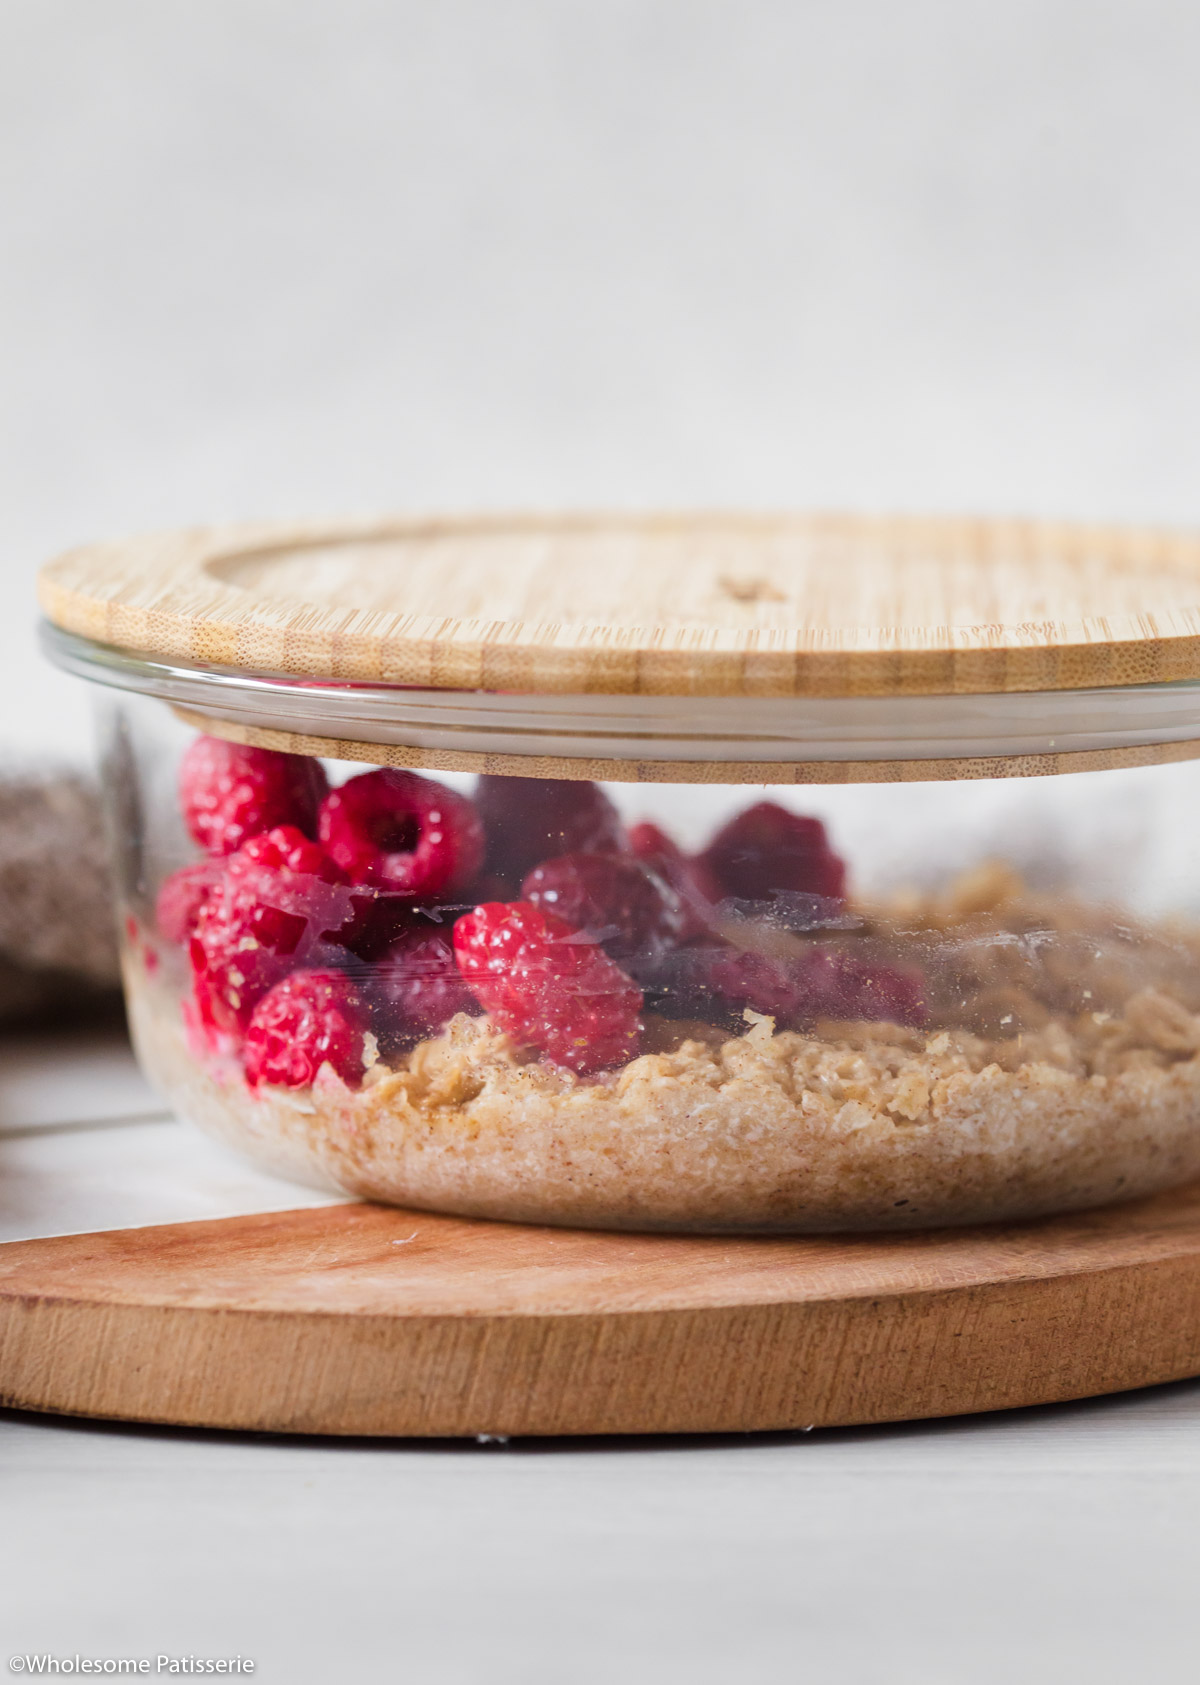 Soaked Weetabix in glass container with wooden lid on.